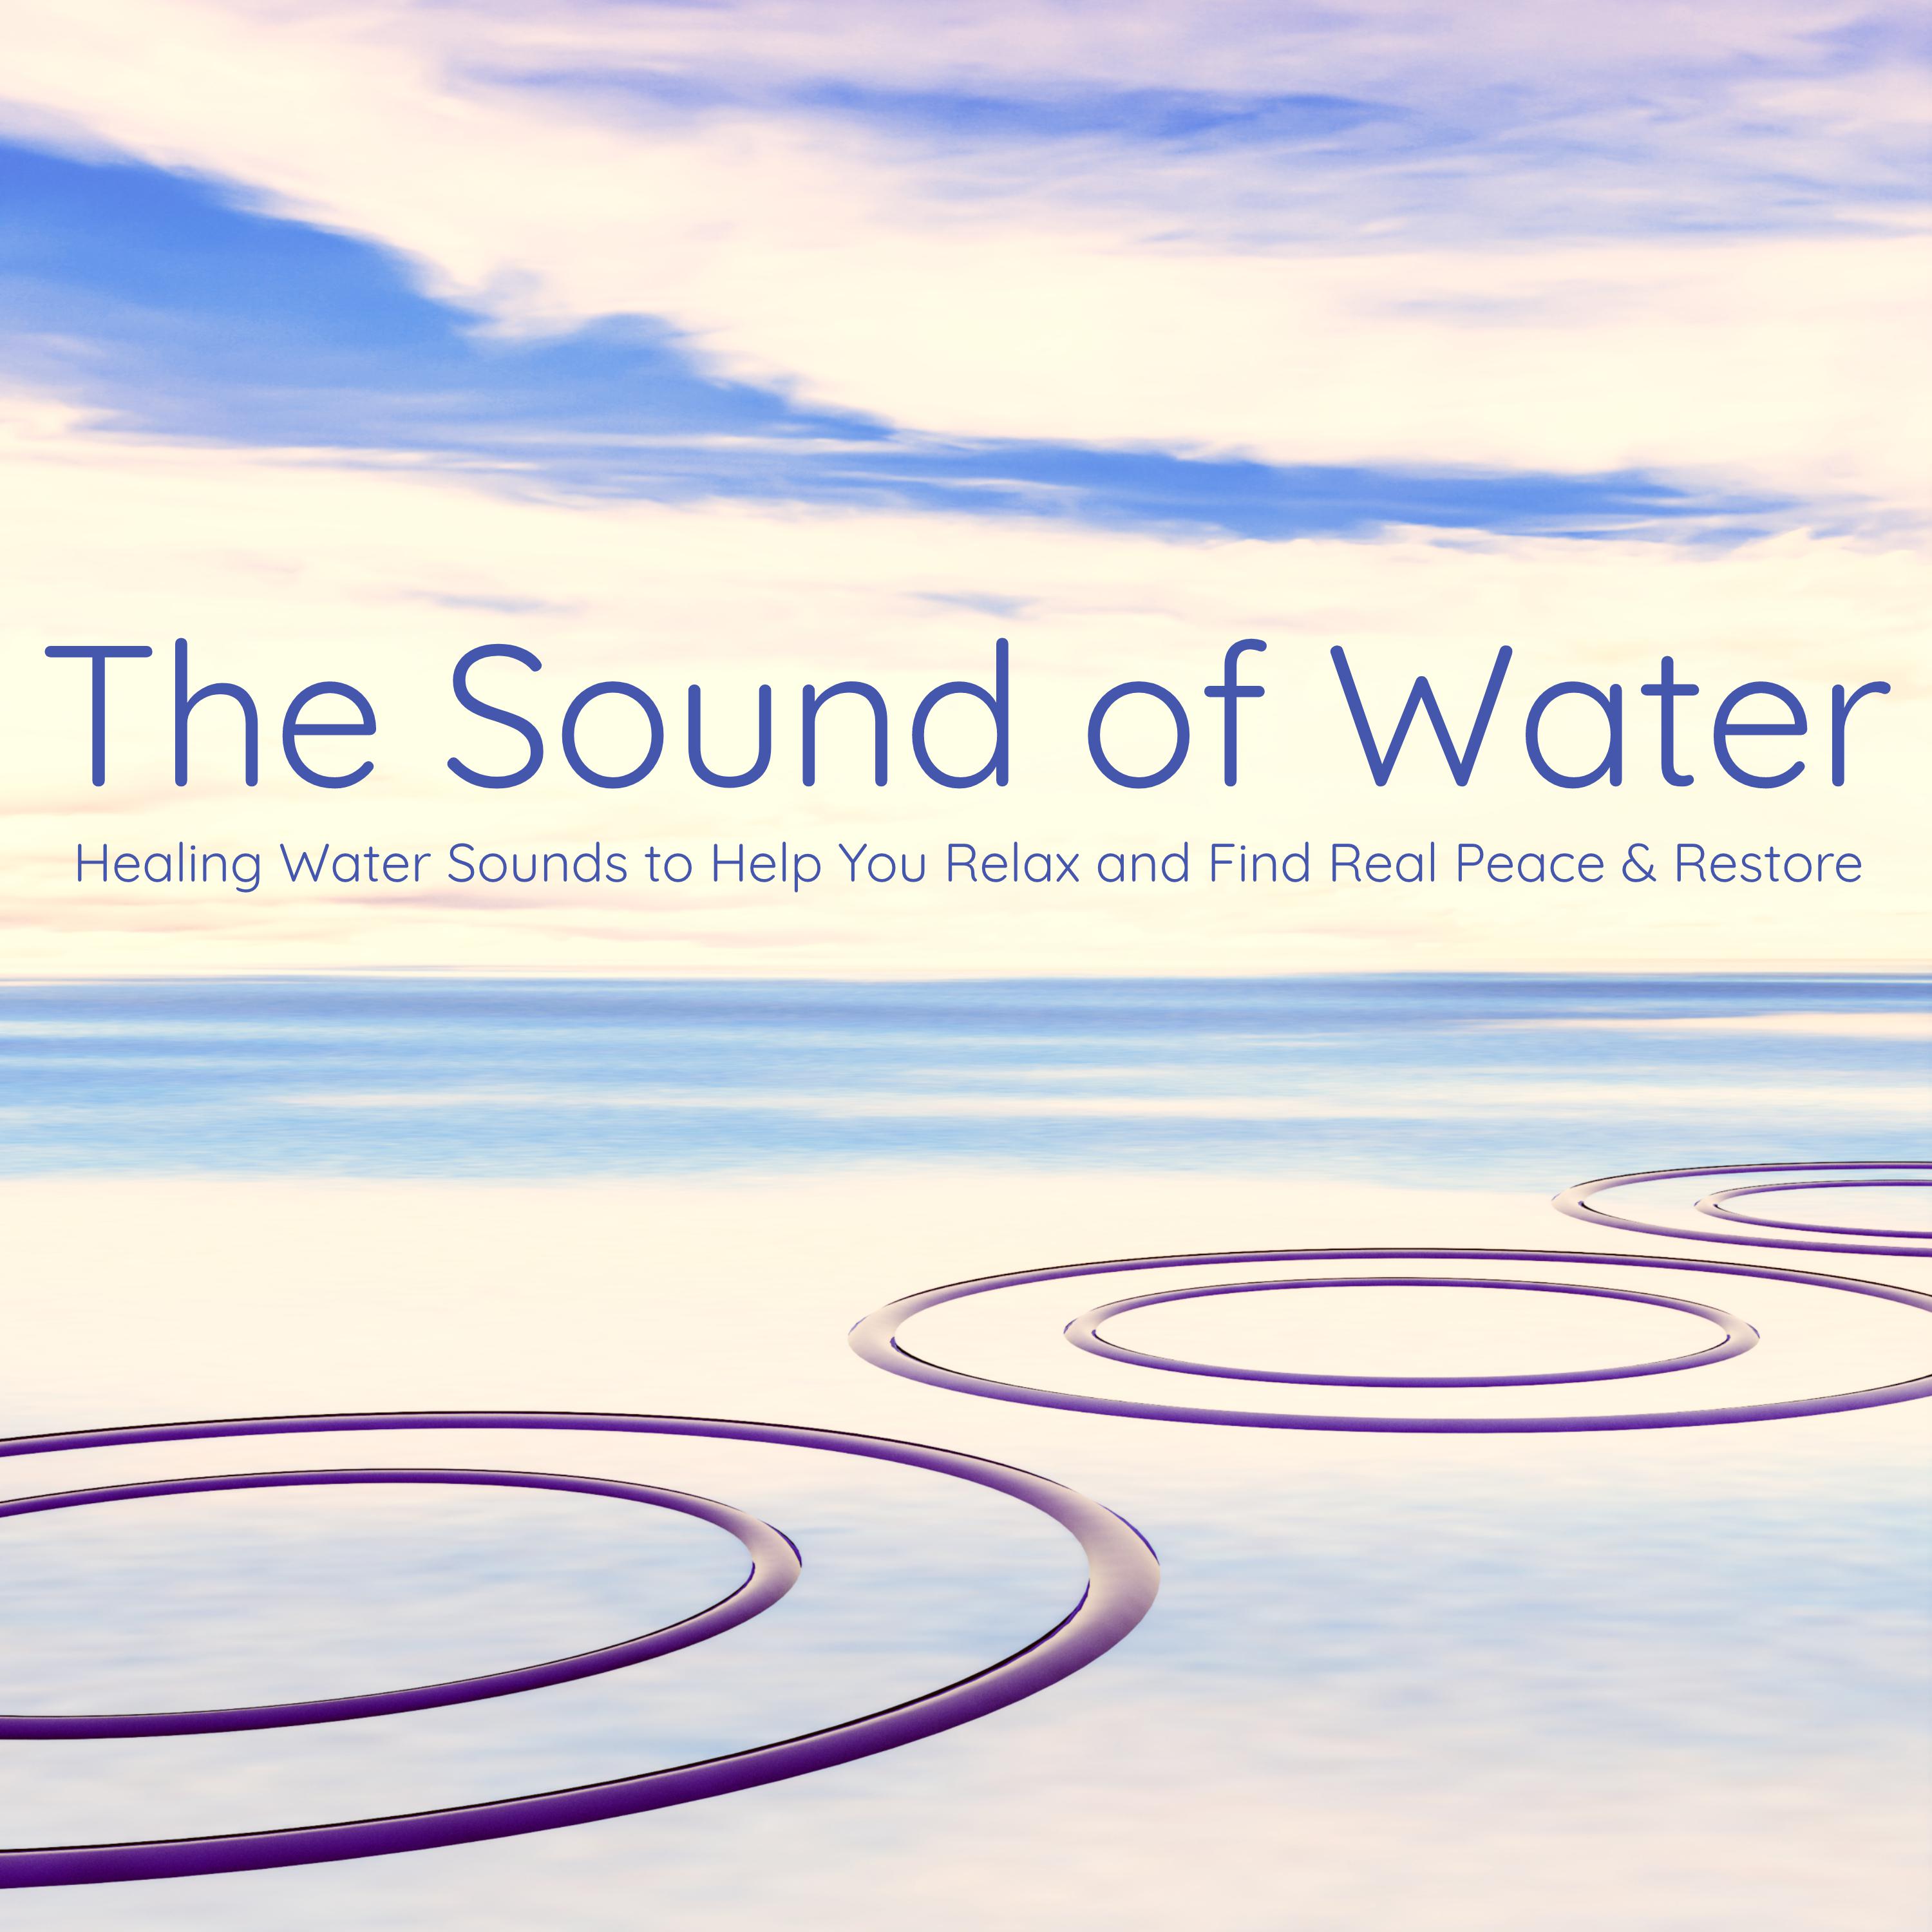 The Sound of Water  Healing Water Sounds to Help You Relax and Find Real Peace  Restore